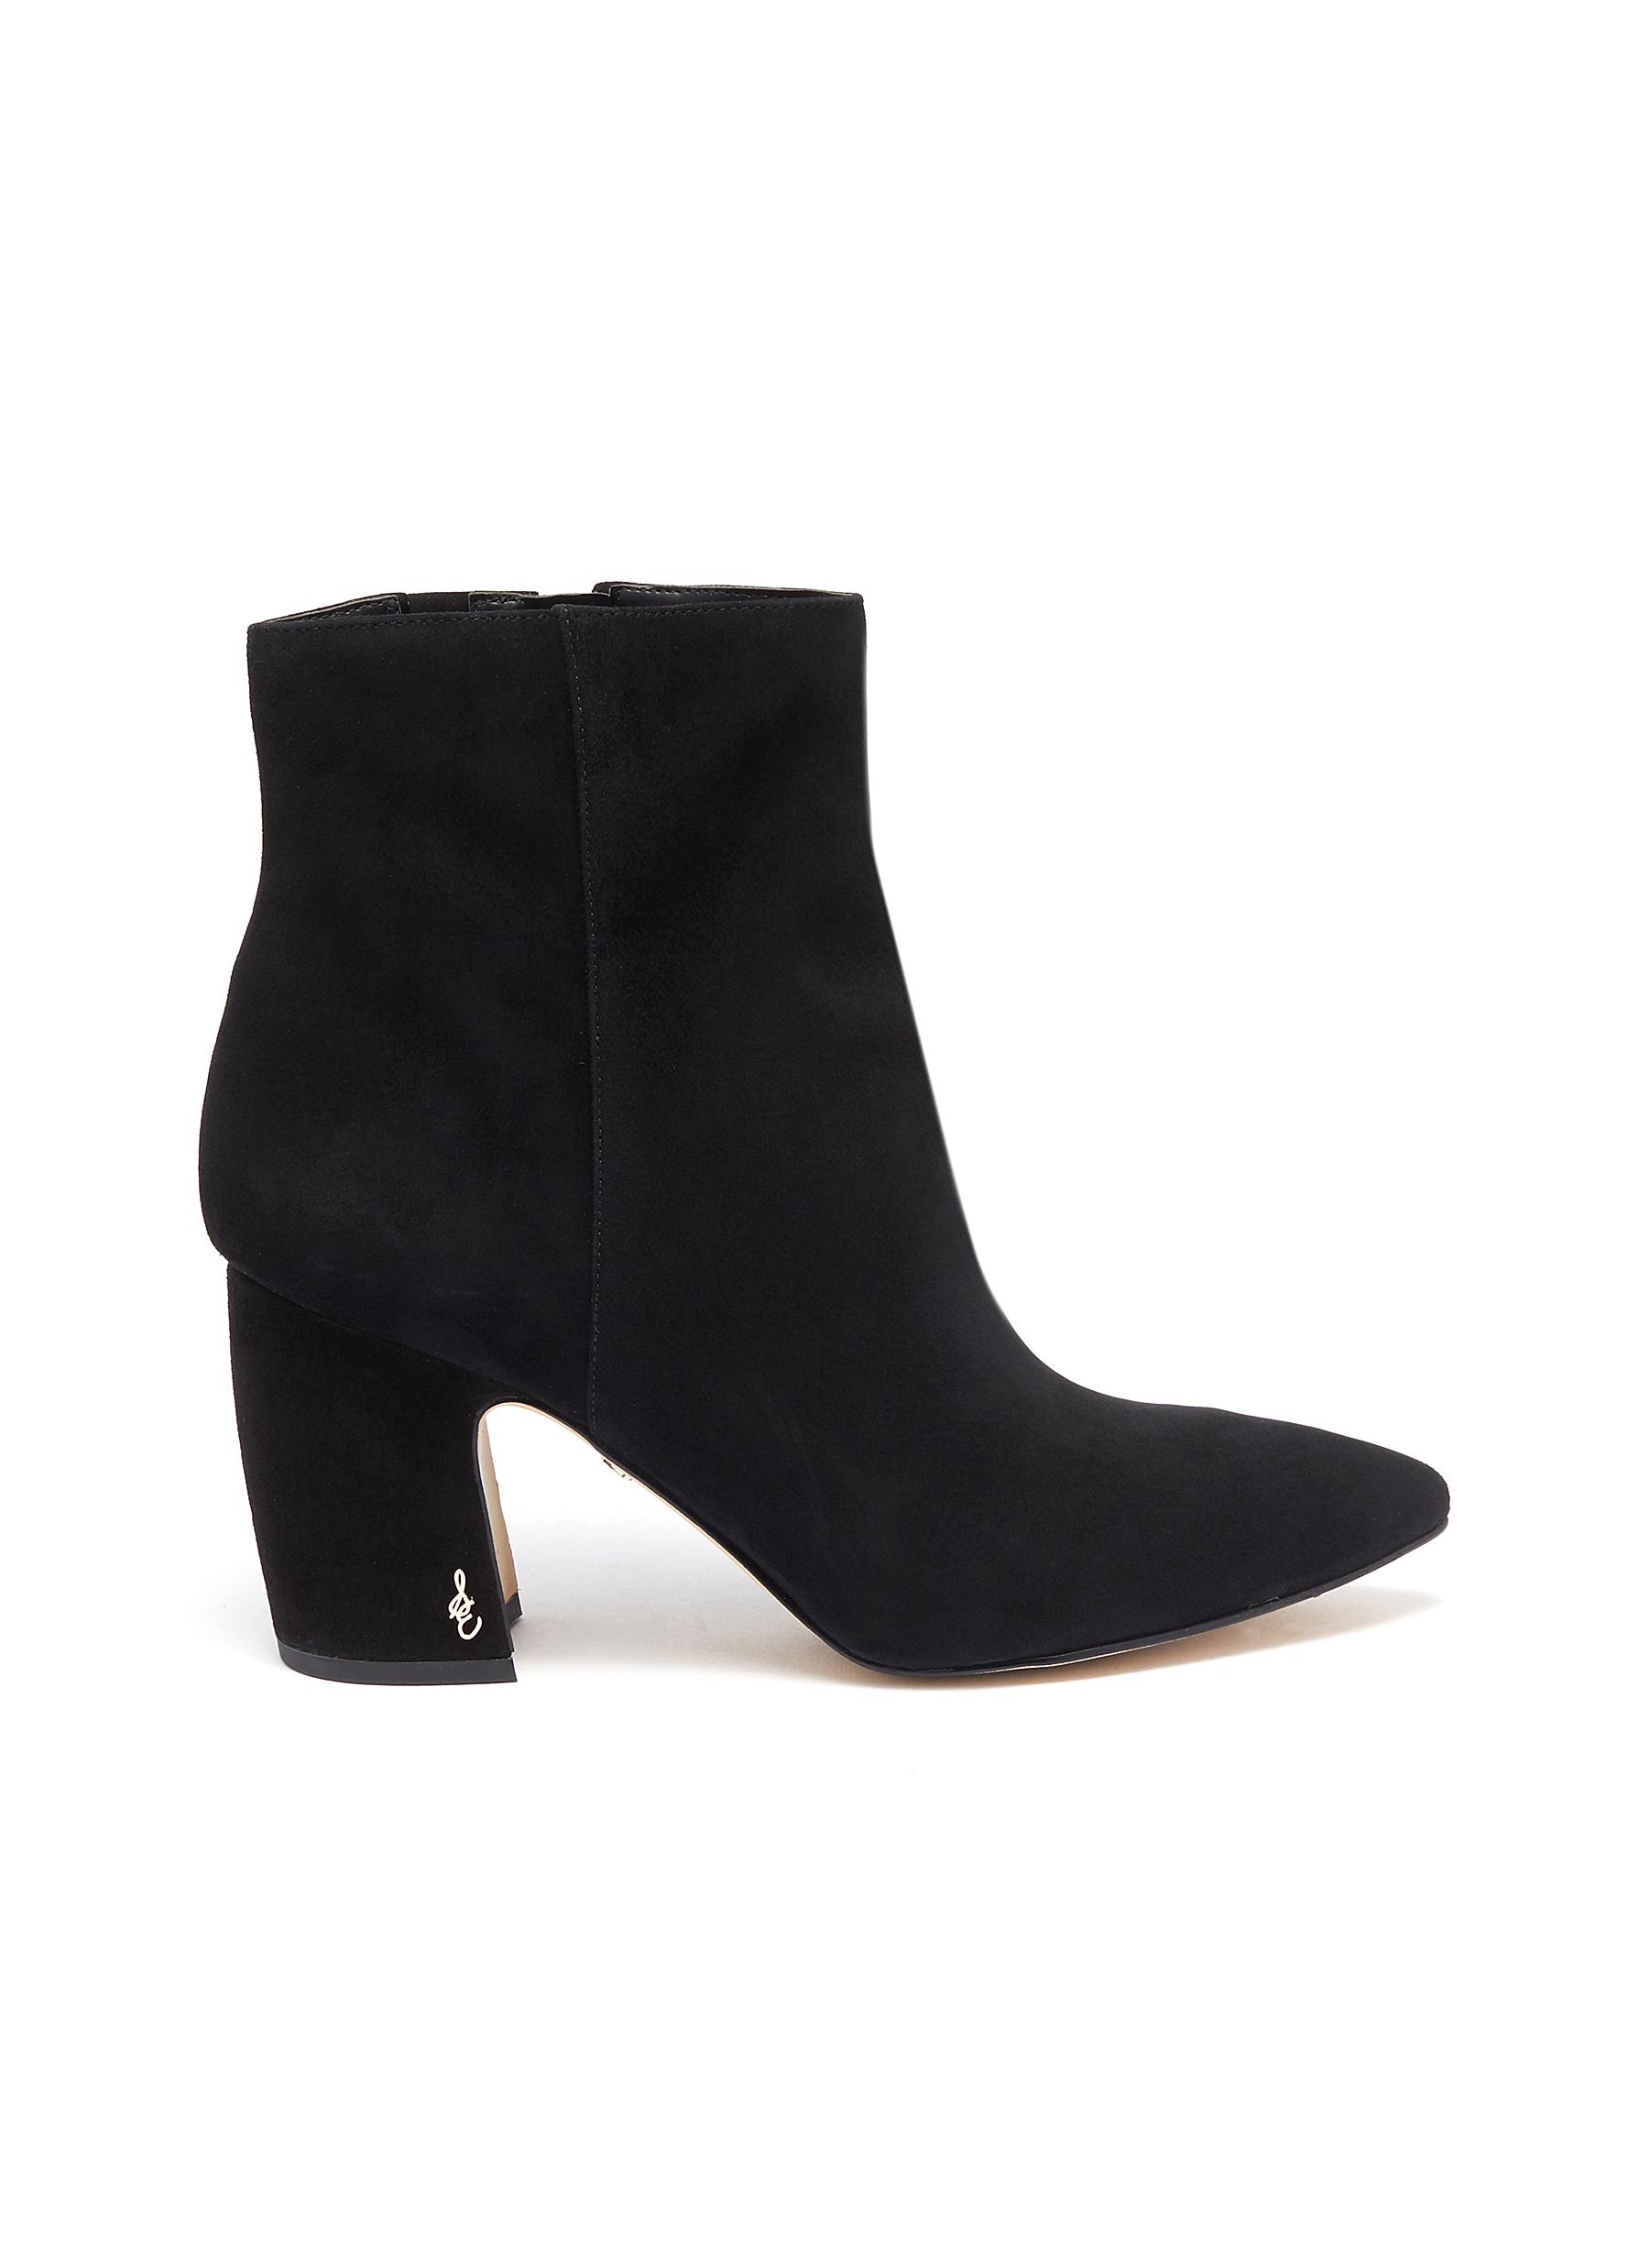 Hilty suede ankle boots by Sam Edelman